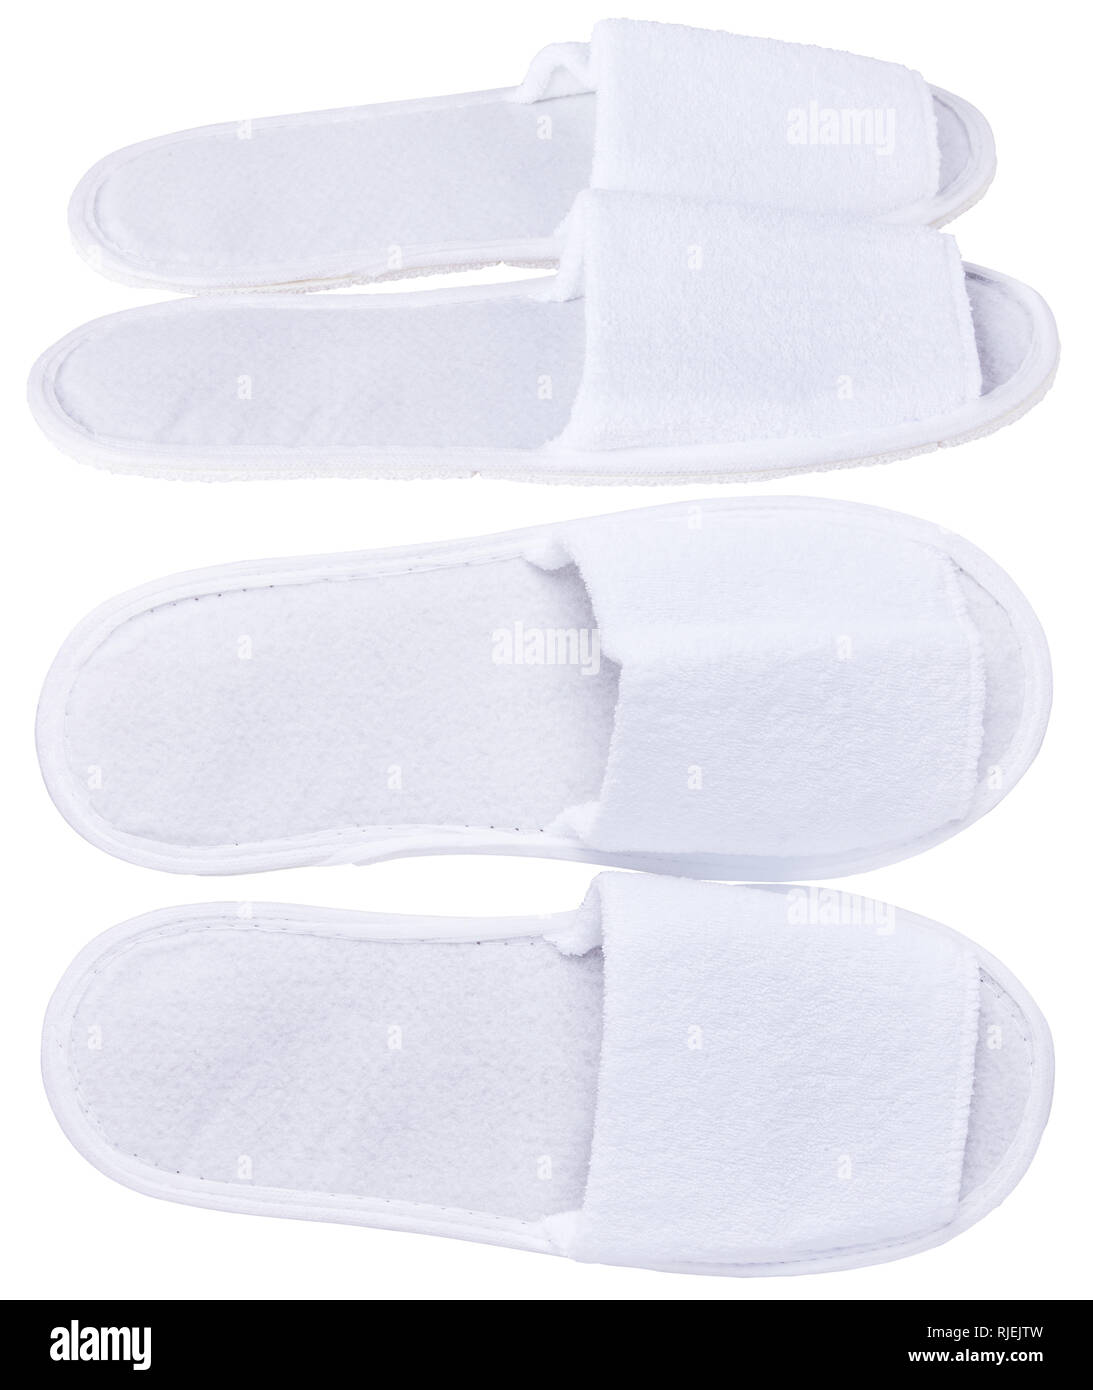 Pair blank white slippers. Top and bottom view. Bed shoes accessory footwear. Spa, hotel, wellness - home and hotel slippers isolated Stock Photo -